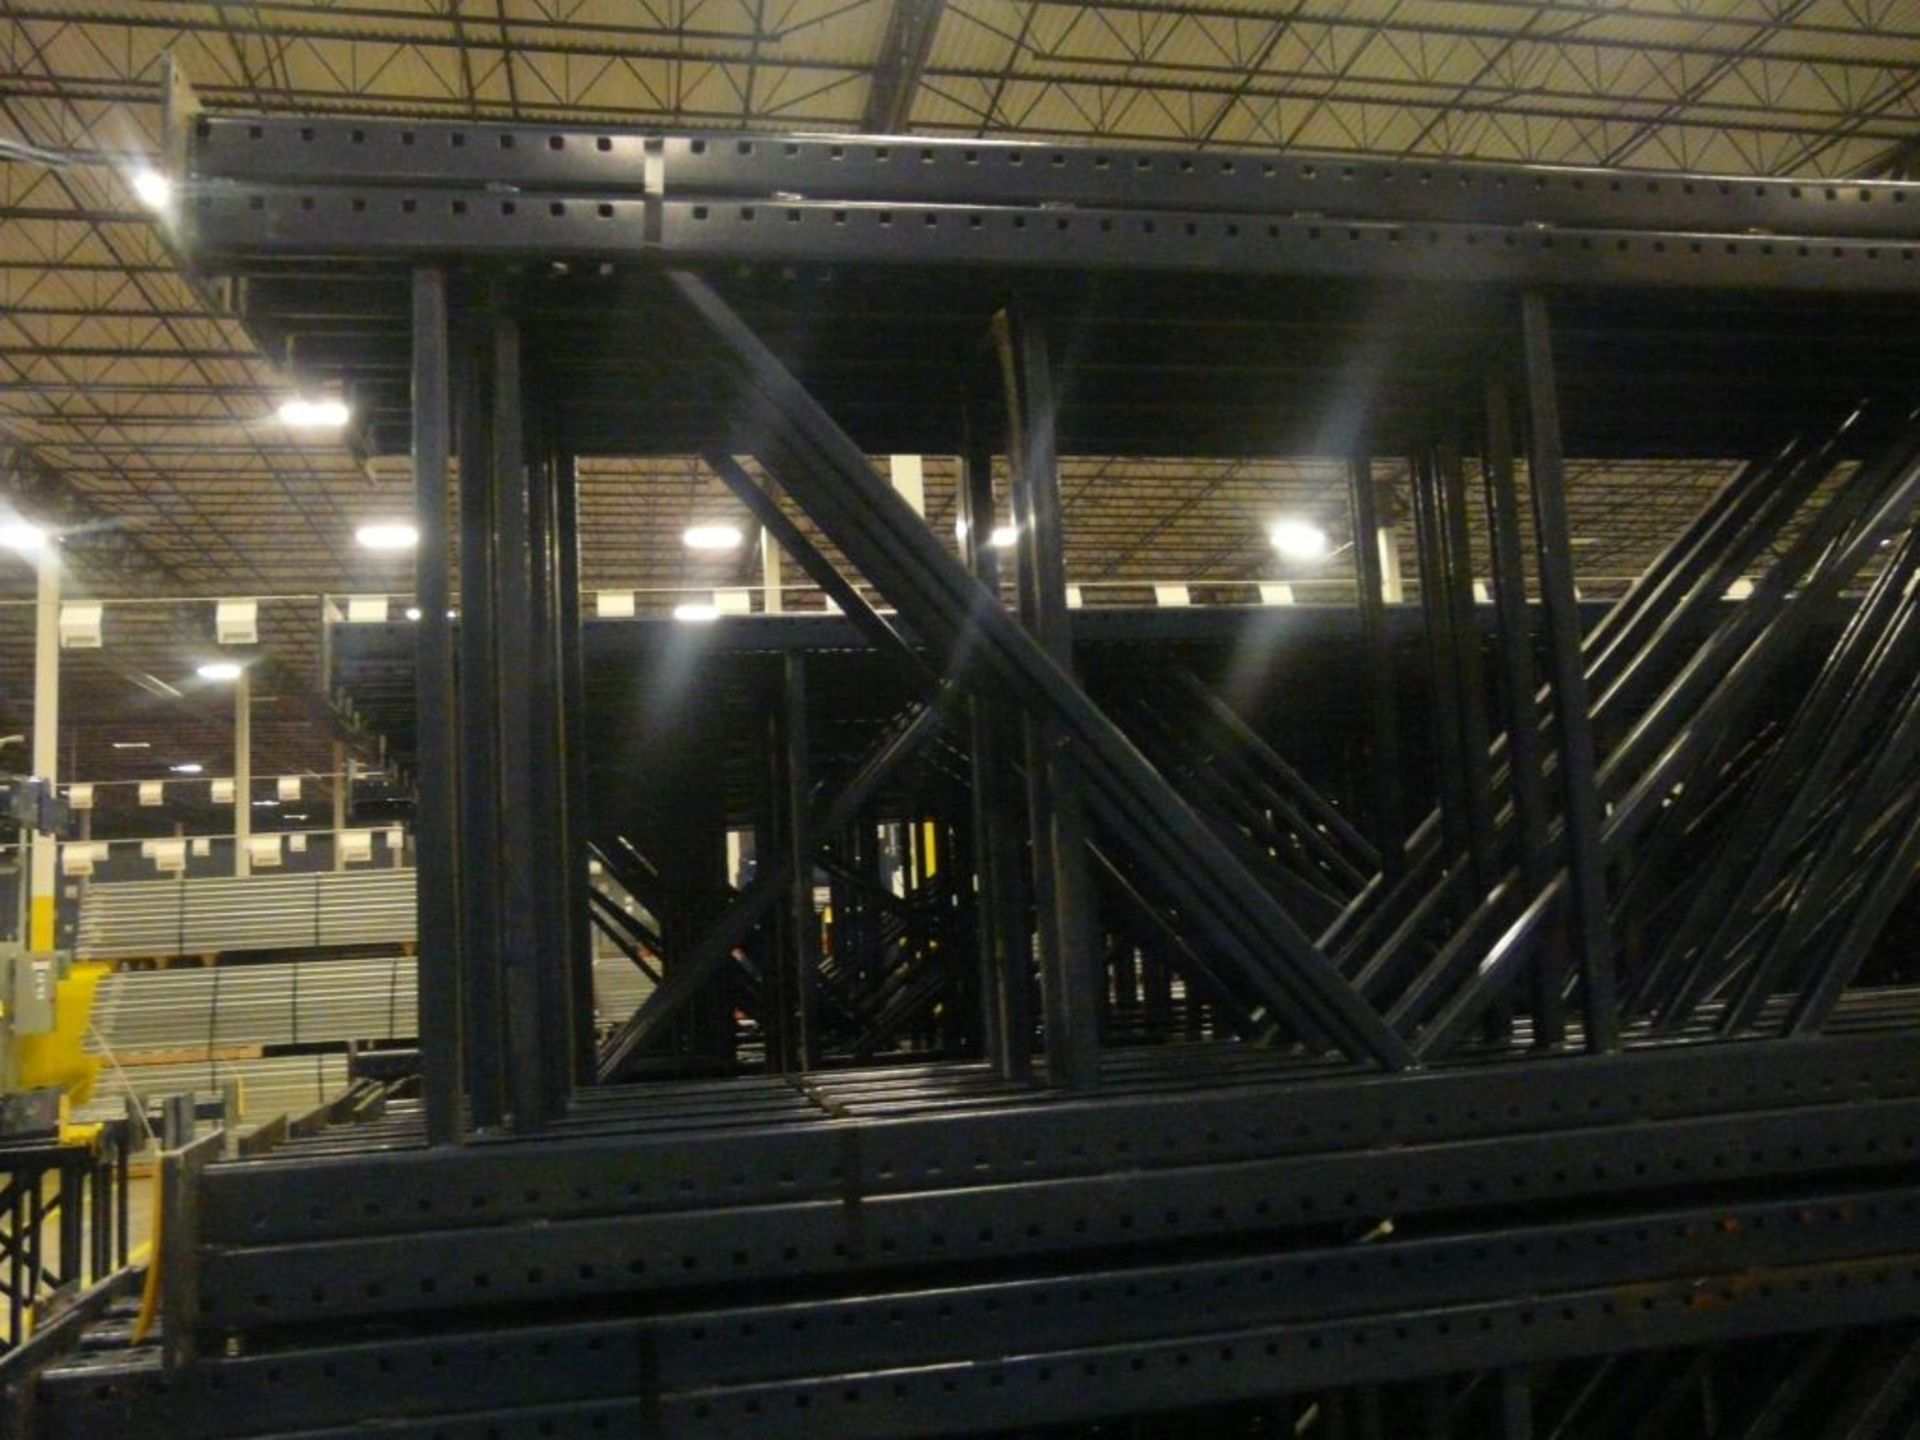 Lot of (10) 29'H x 42"W Double Column Uprights with 11' Second Column - Tag: 224096 - $30 Lot - Image 2 of 3